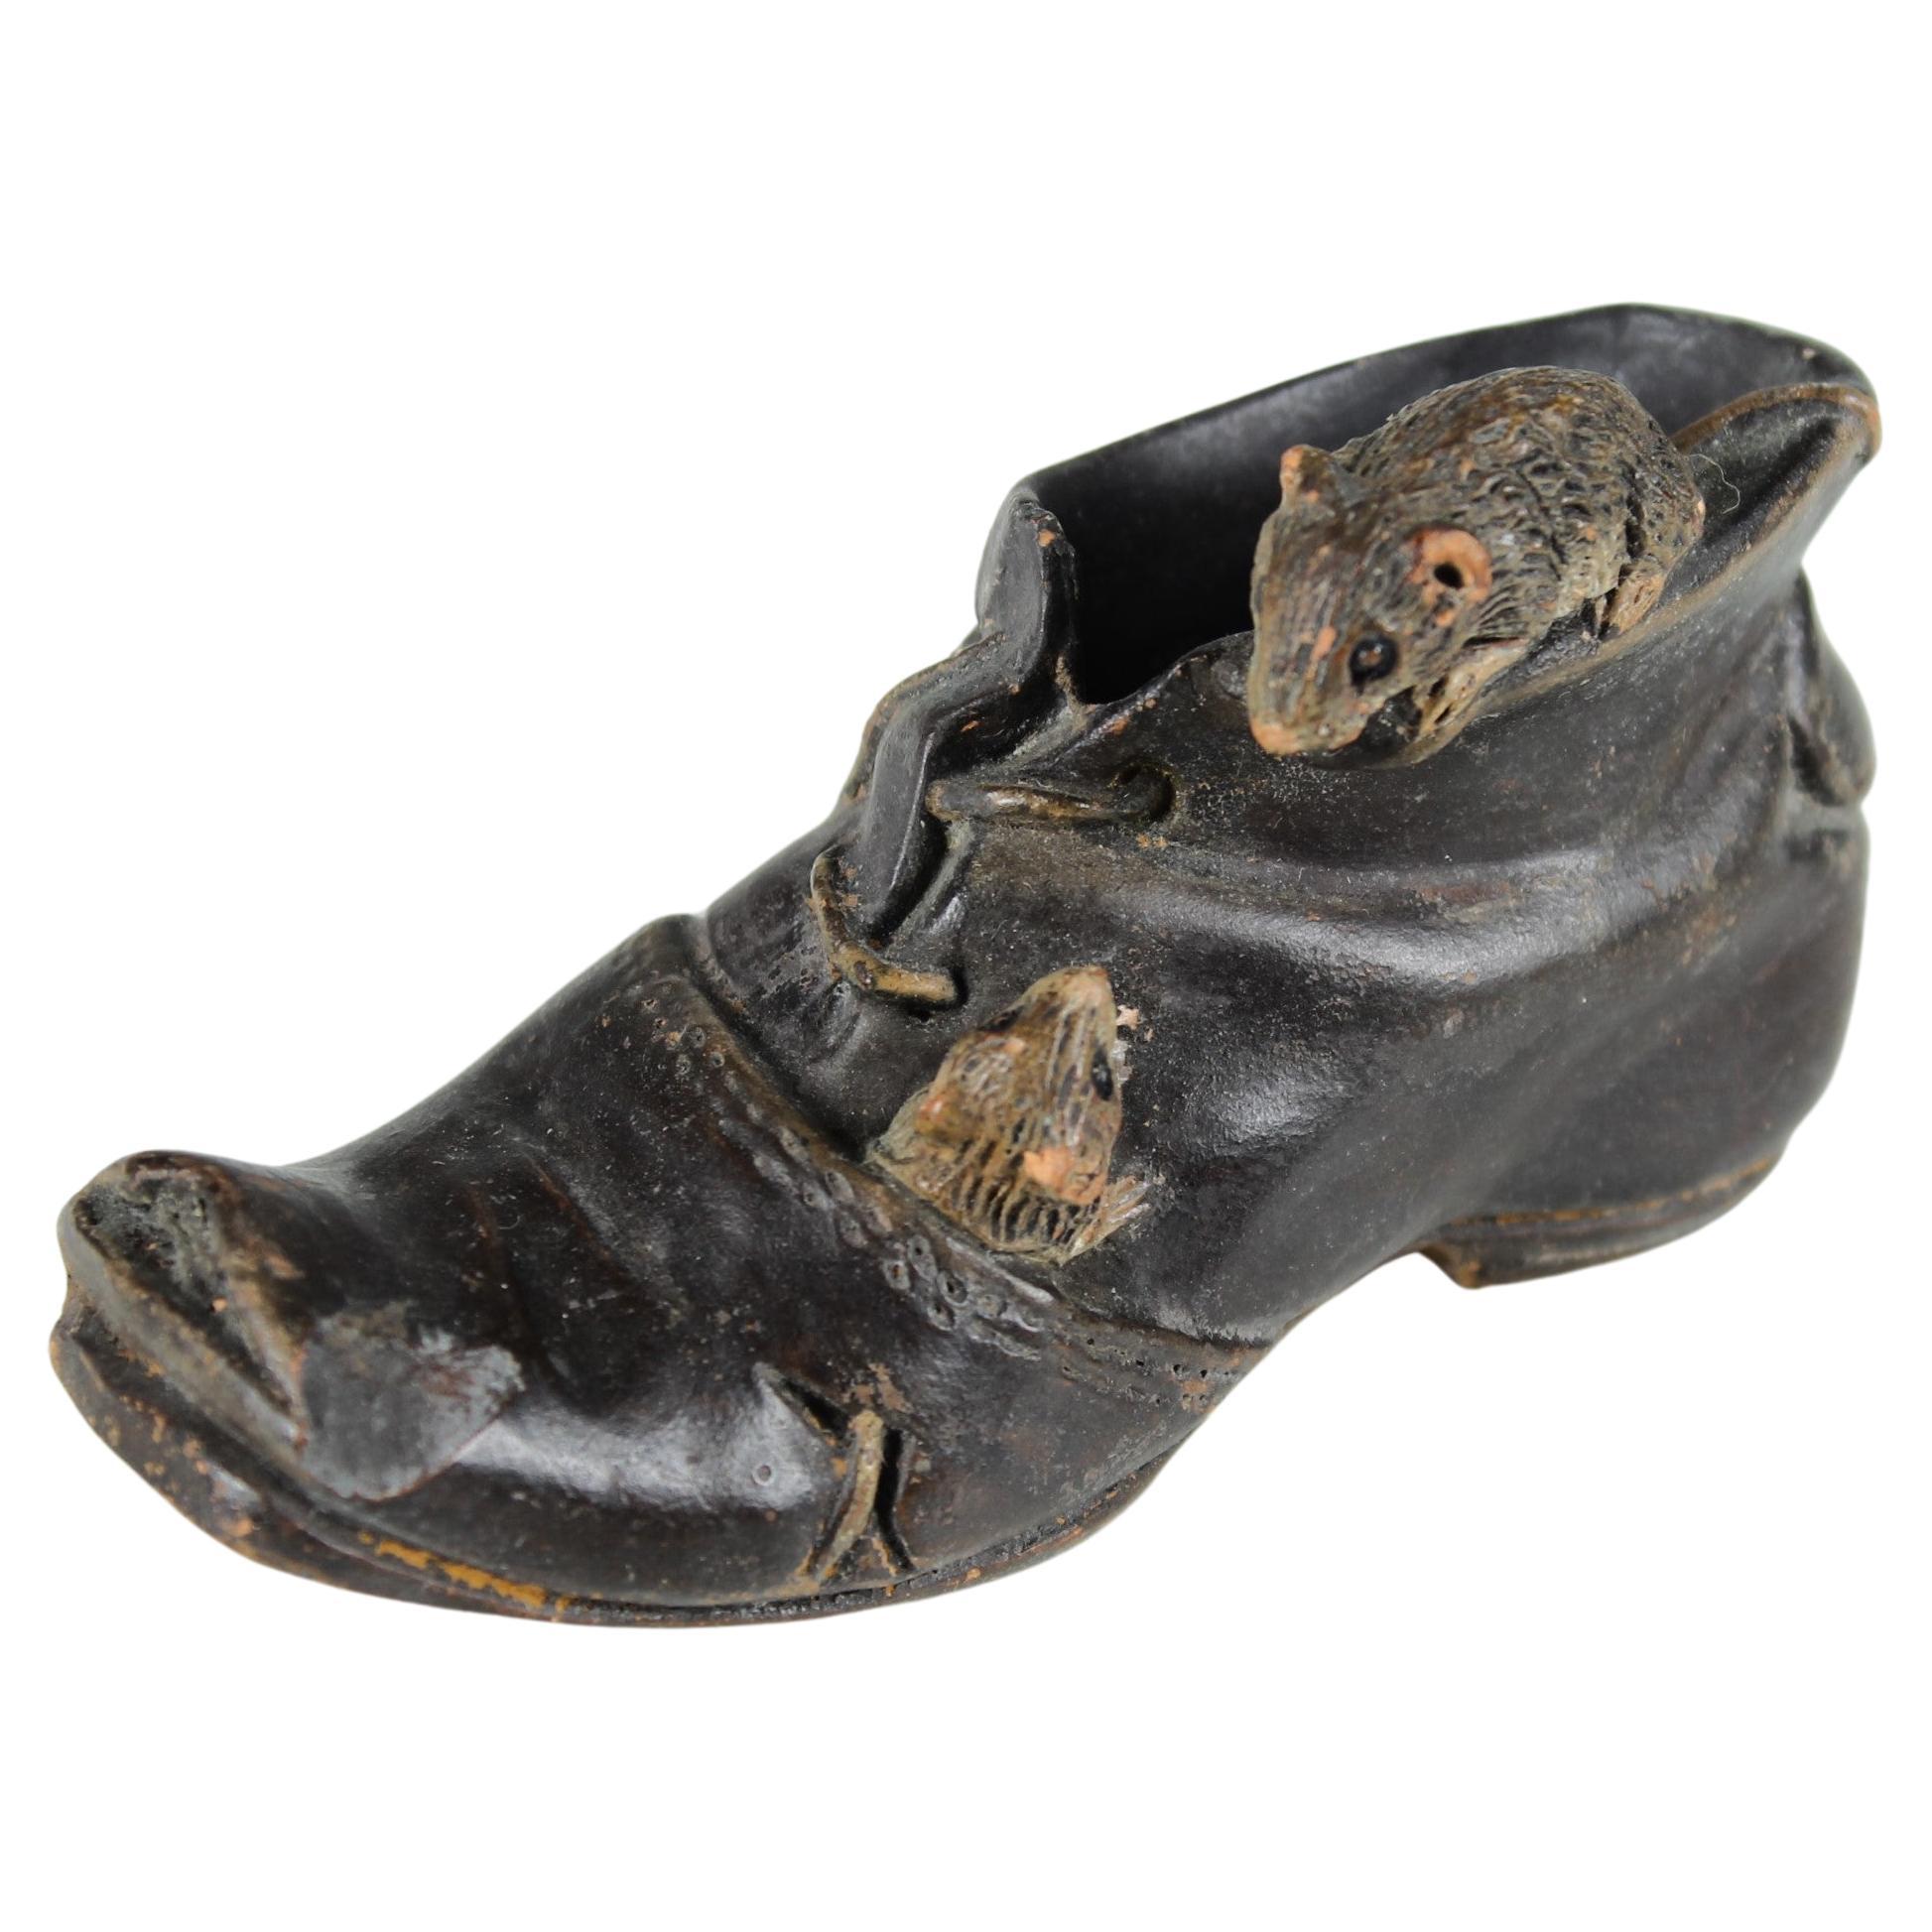 Antique French Ceramic, Shoe With Mice, Circa 1900